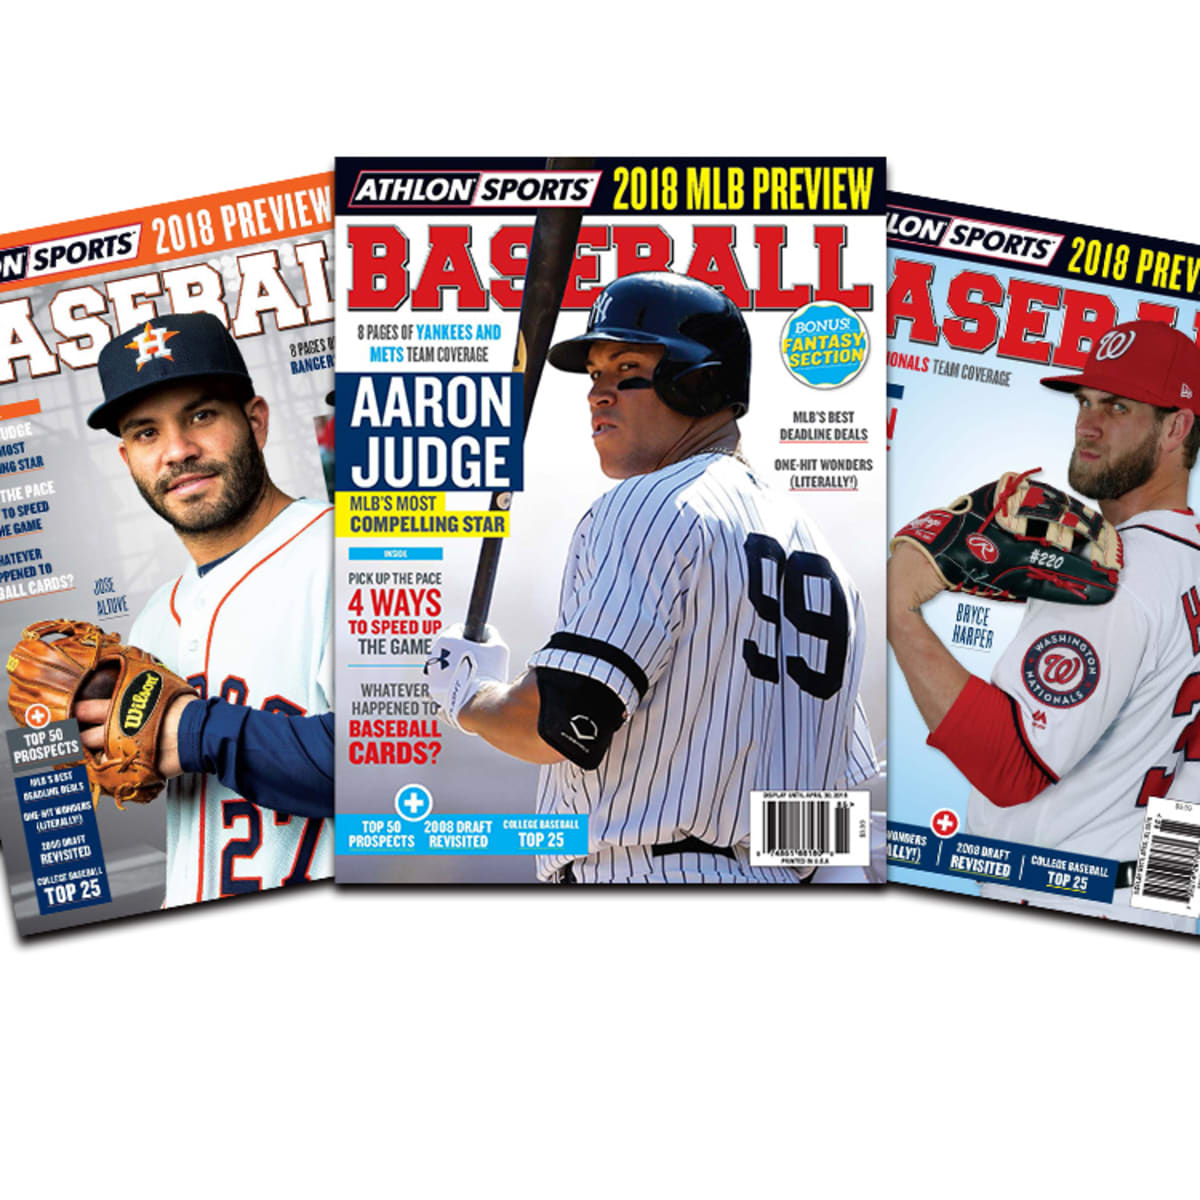 Athlon Sports' 2018 MLB Preview Magazine is Available Now 